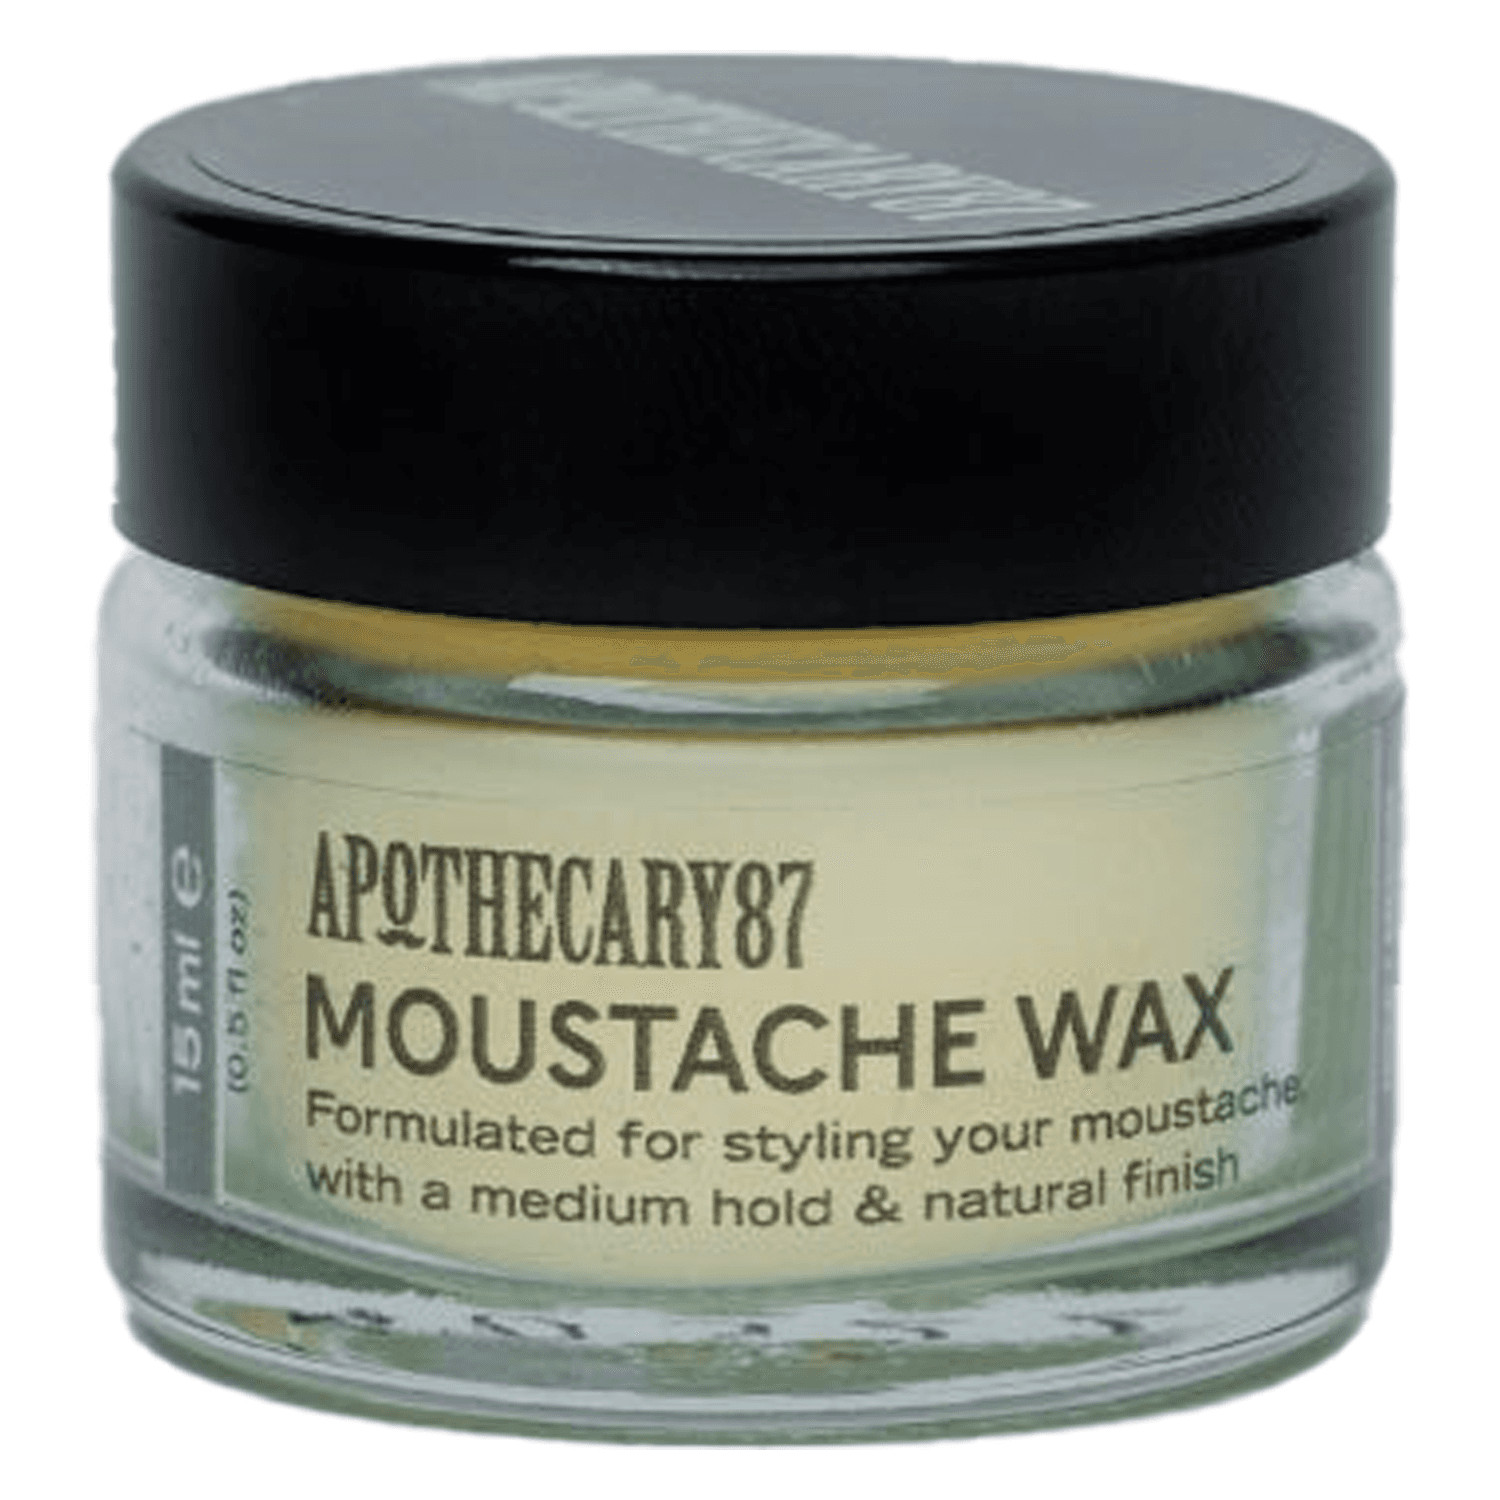 Apothecary87 Grooming - Moustache Wax 1893 Fragrance